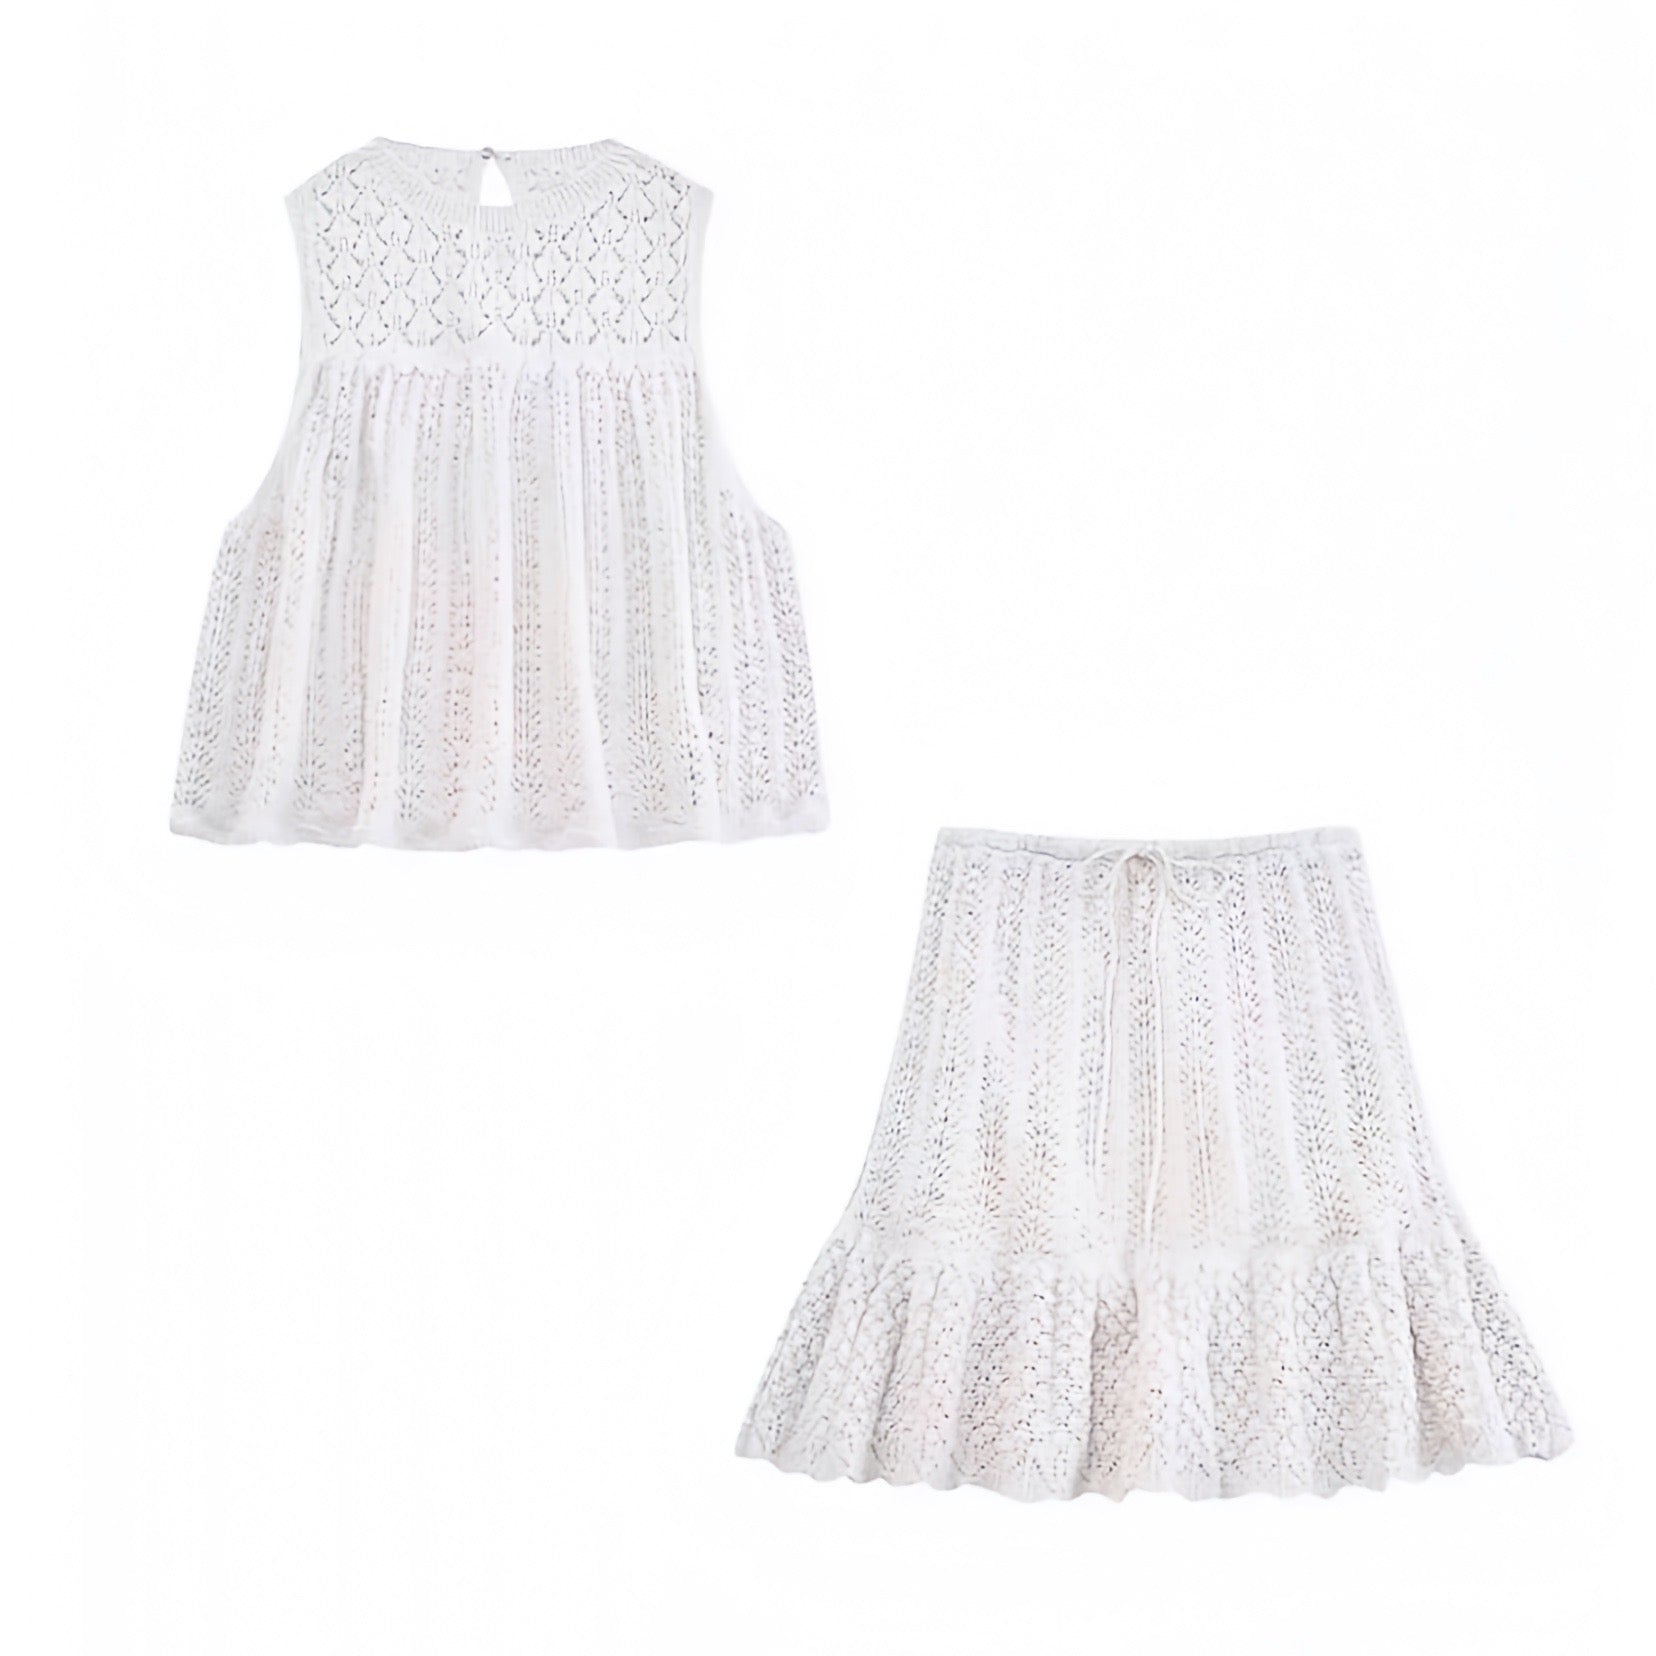 white-ivory-knit-crochet-embroidered-patterned-ruffled-short-sleeve-cut-out-crop-cami-top-blouse-and-mid-low-rise-mini-skirt-two-piece-set-dress-women-ladies-chic-trendy-spring-2024-summer-elegant-casual-semi-formal-classy-european-beach-wear-tropical-vacation-sundress-zara-revolve-aritzia